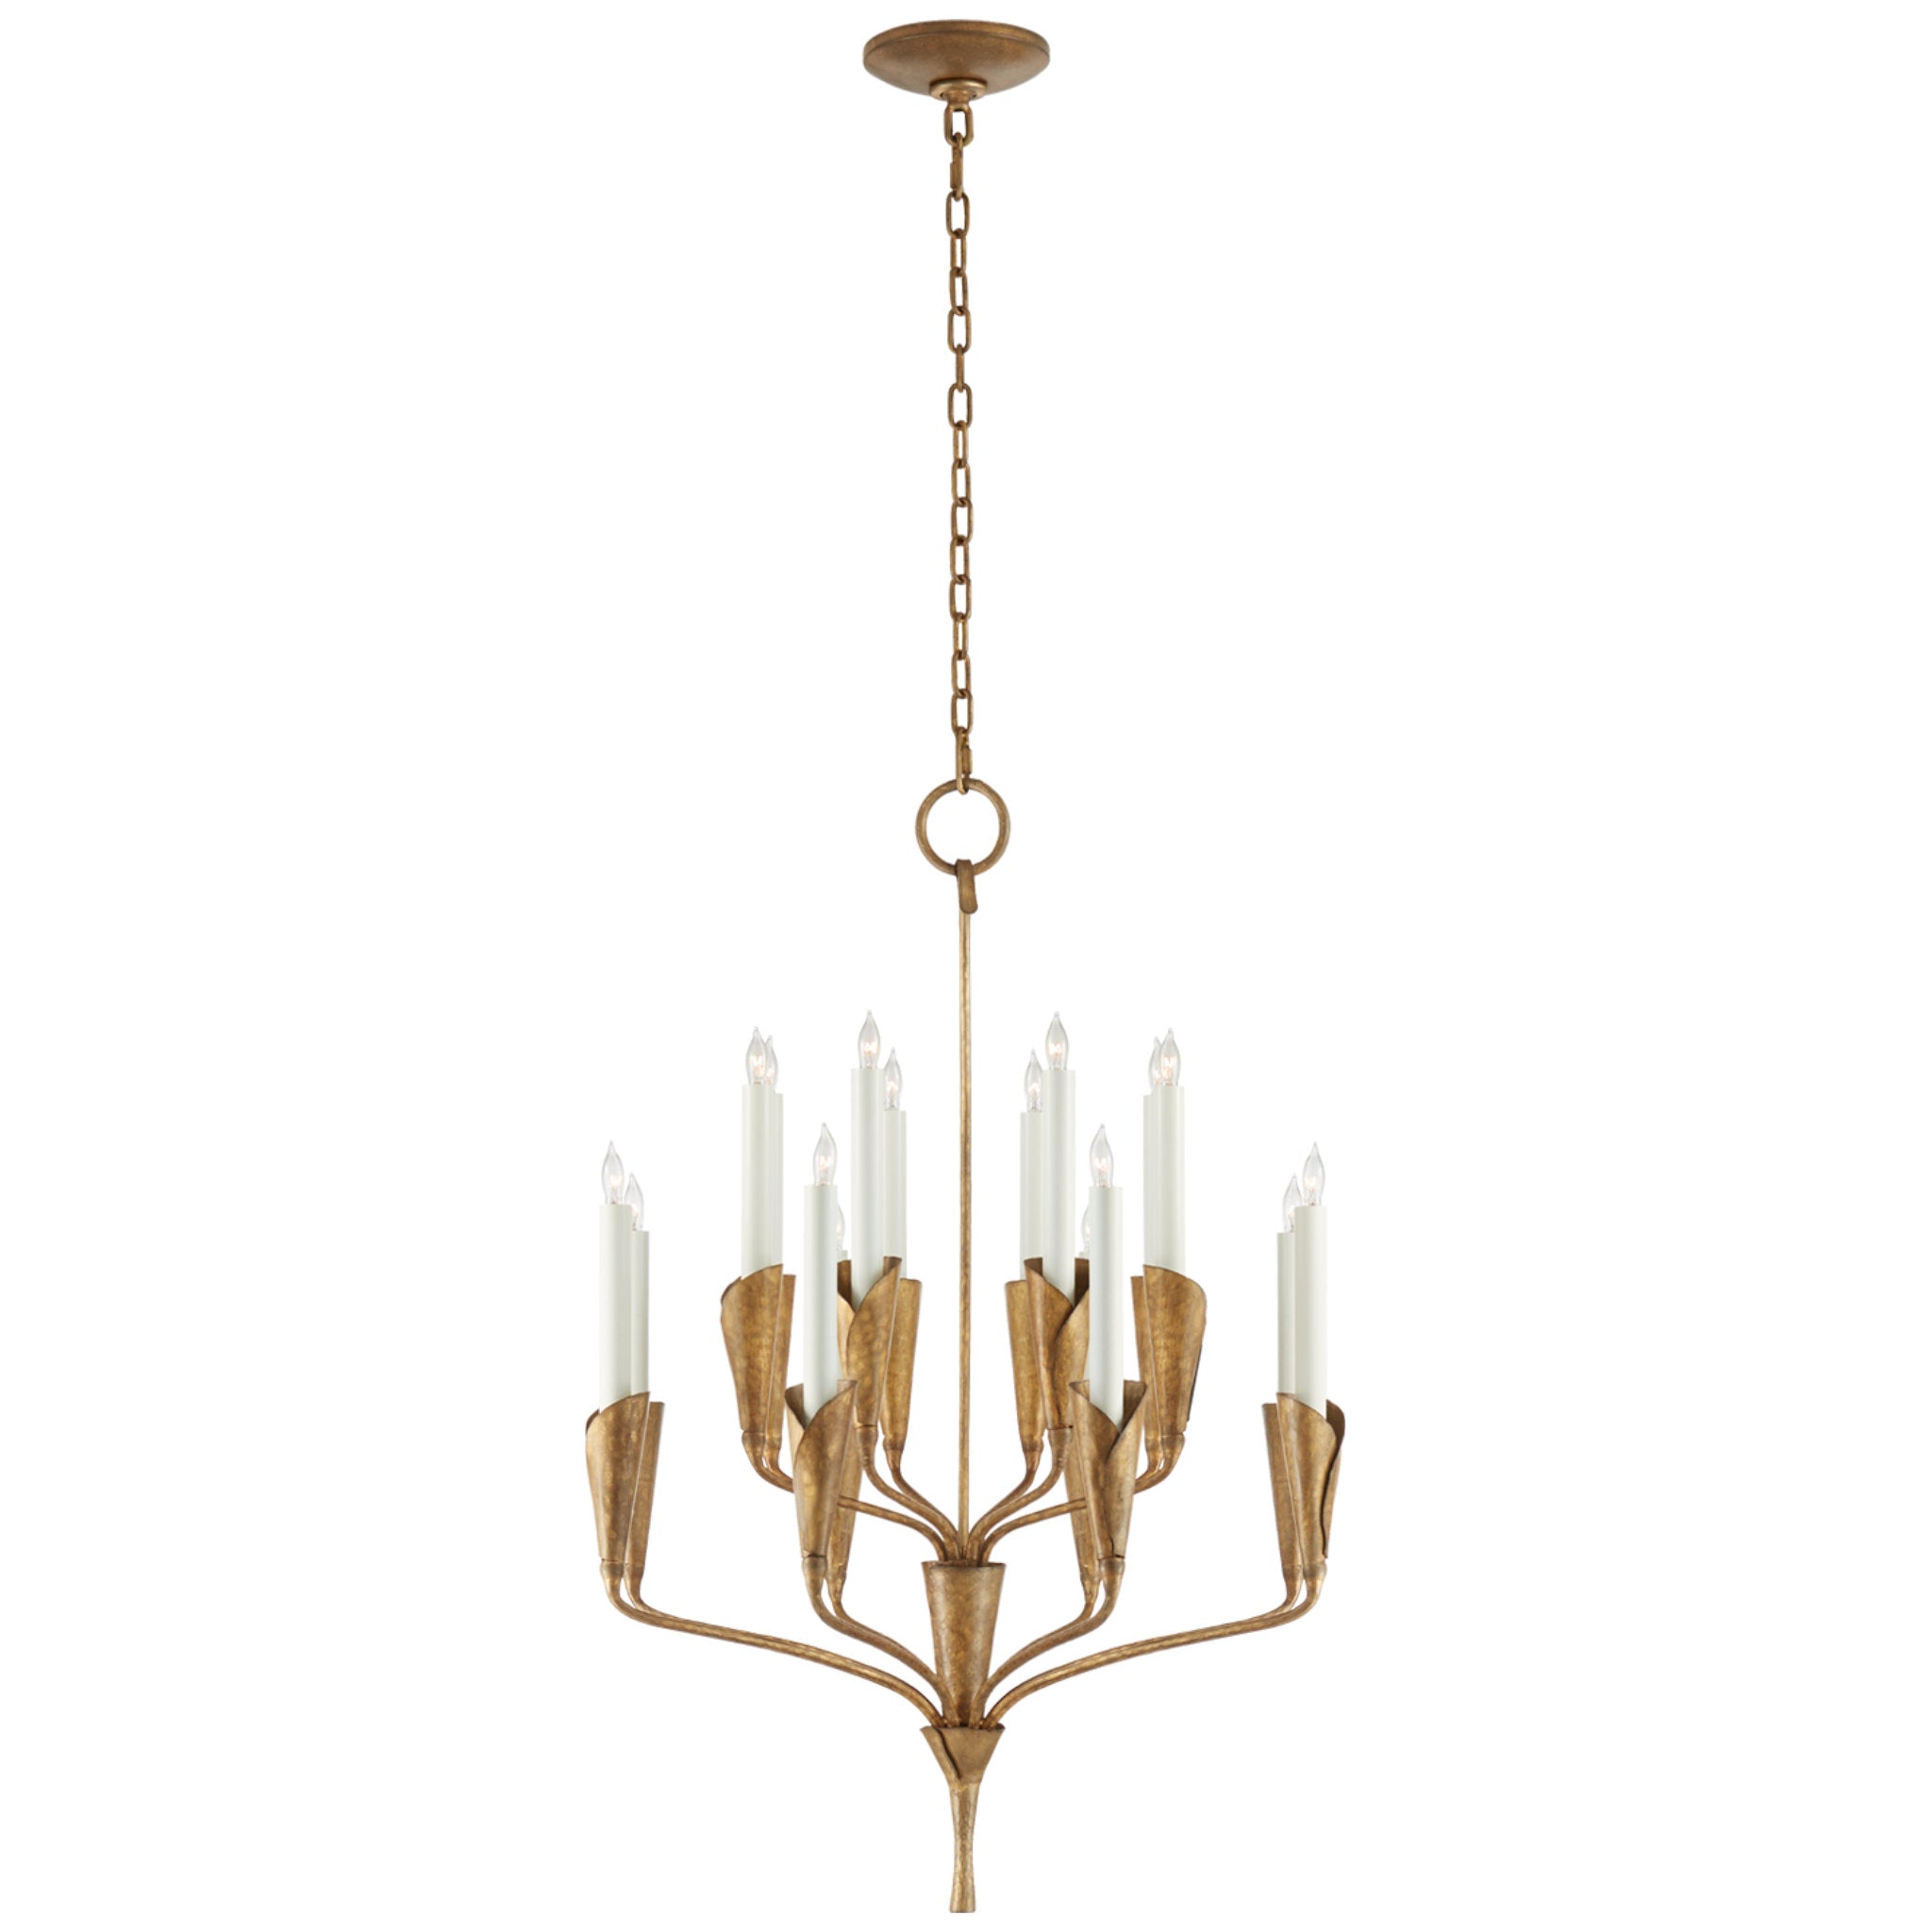 Chapman & Myers Aiden Small Chandelier in Gilded Iron